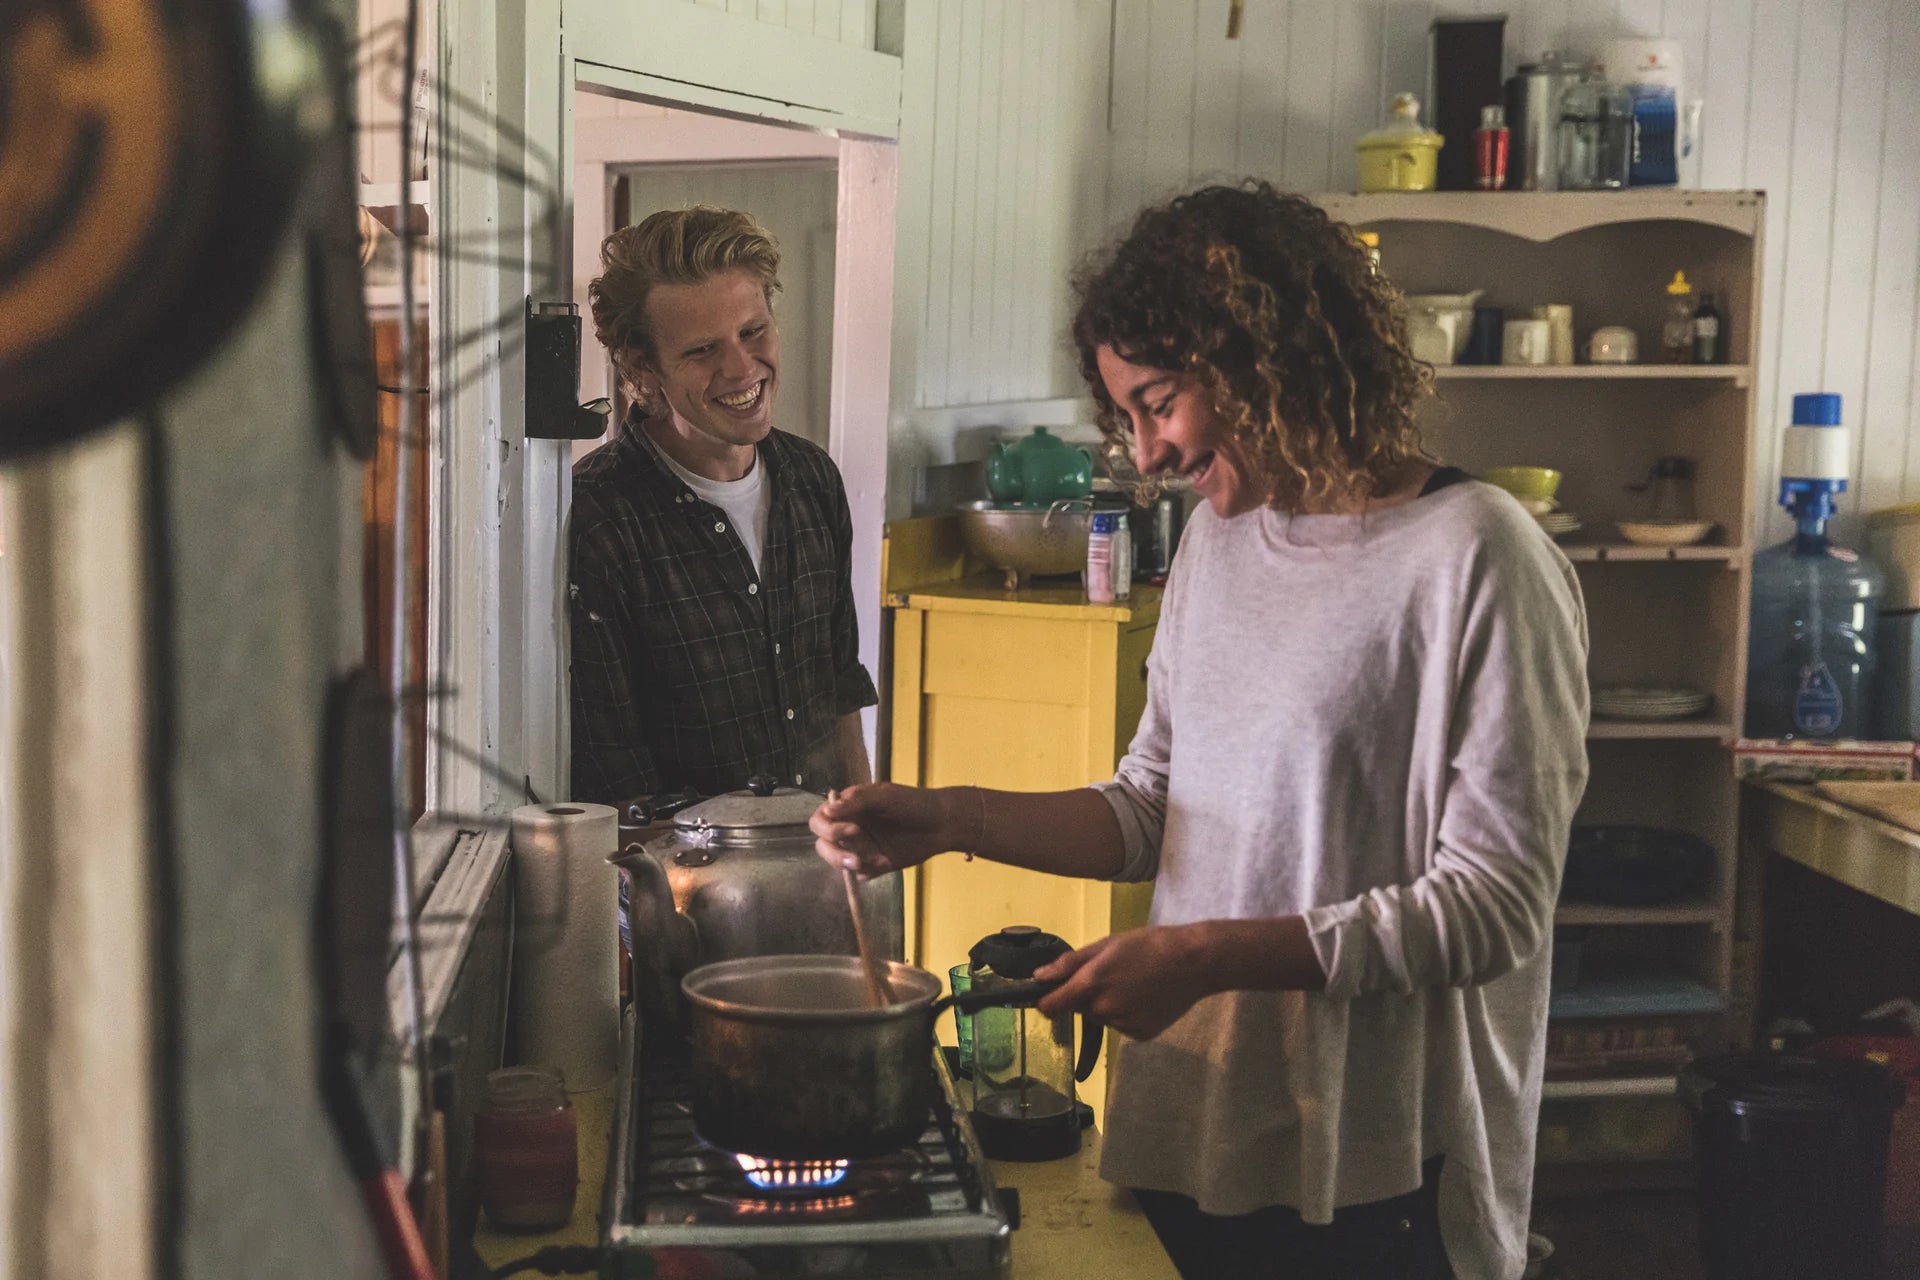 A young couple preparing gut healthy comfort food in a cozy kitchen and laughing together.